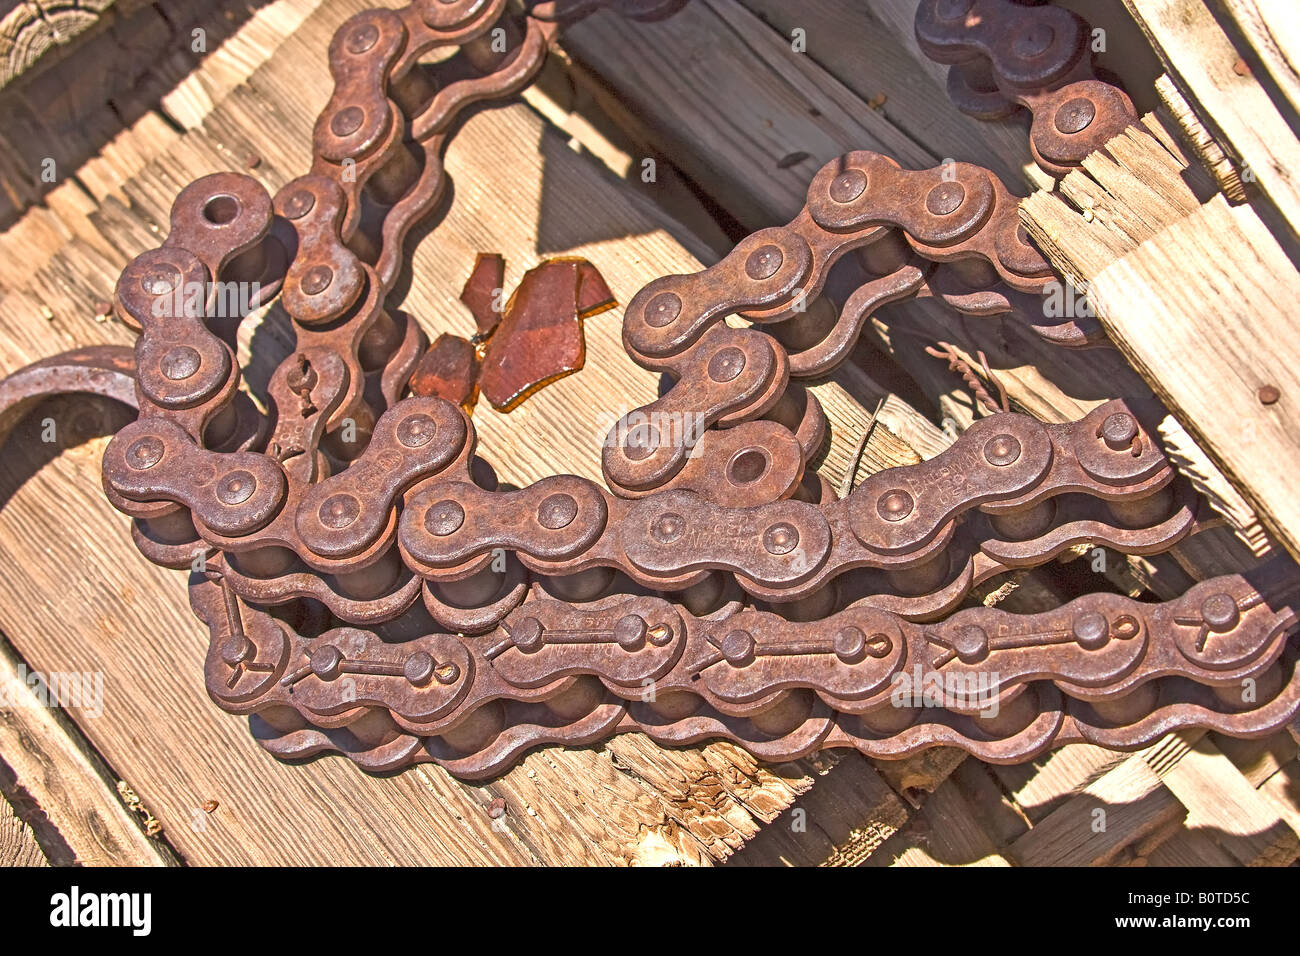 Old chain as used 50 years ago to drive the vintage Mack truck. Stock Photo